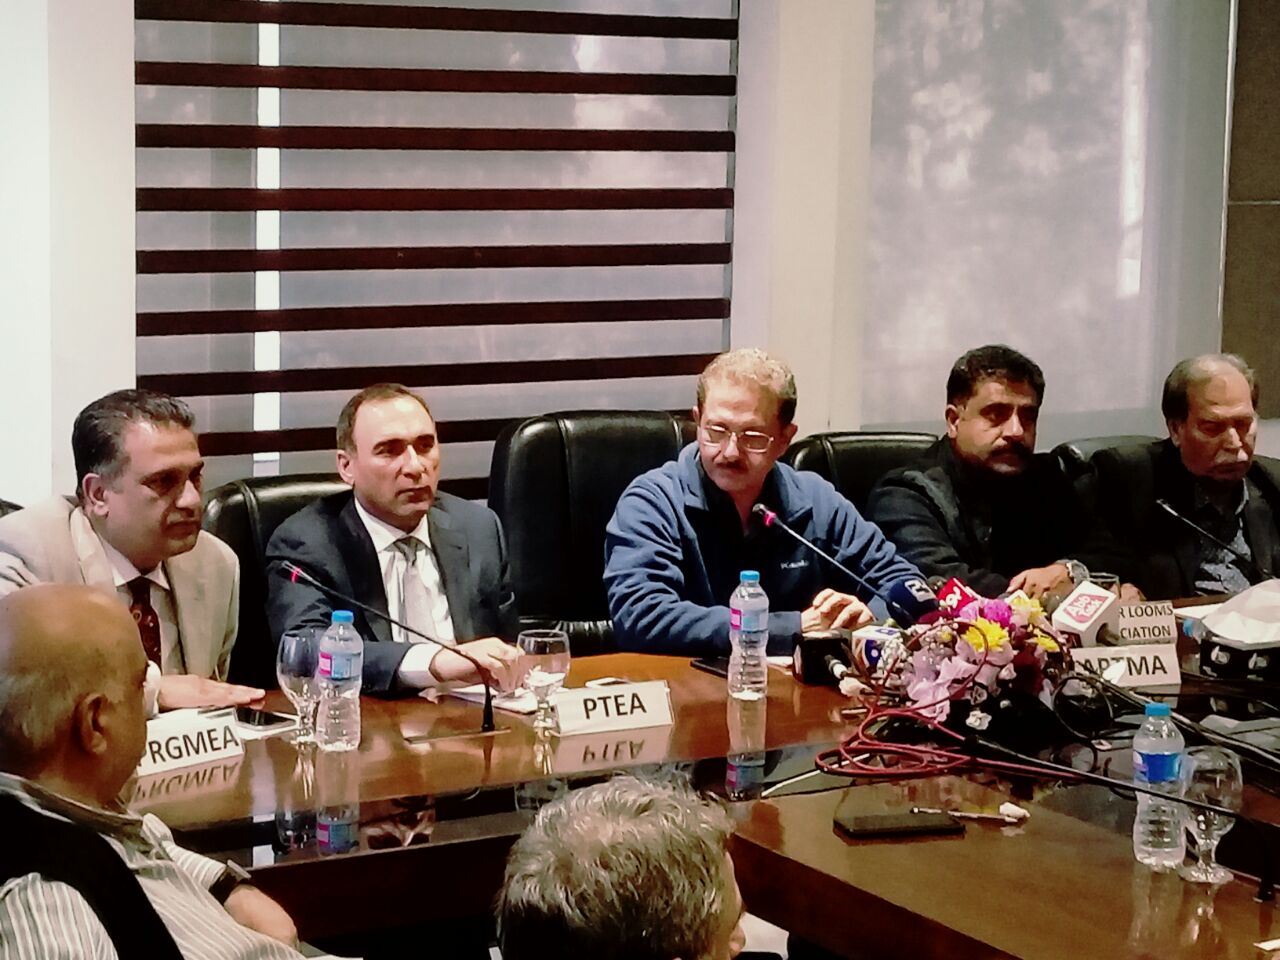 https://aptma.org.pk/wp-content/uploads/2021/10/Meeting-of-the-Textile-Industry-Associations-4.jpg